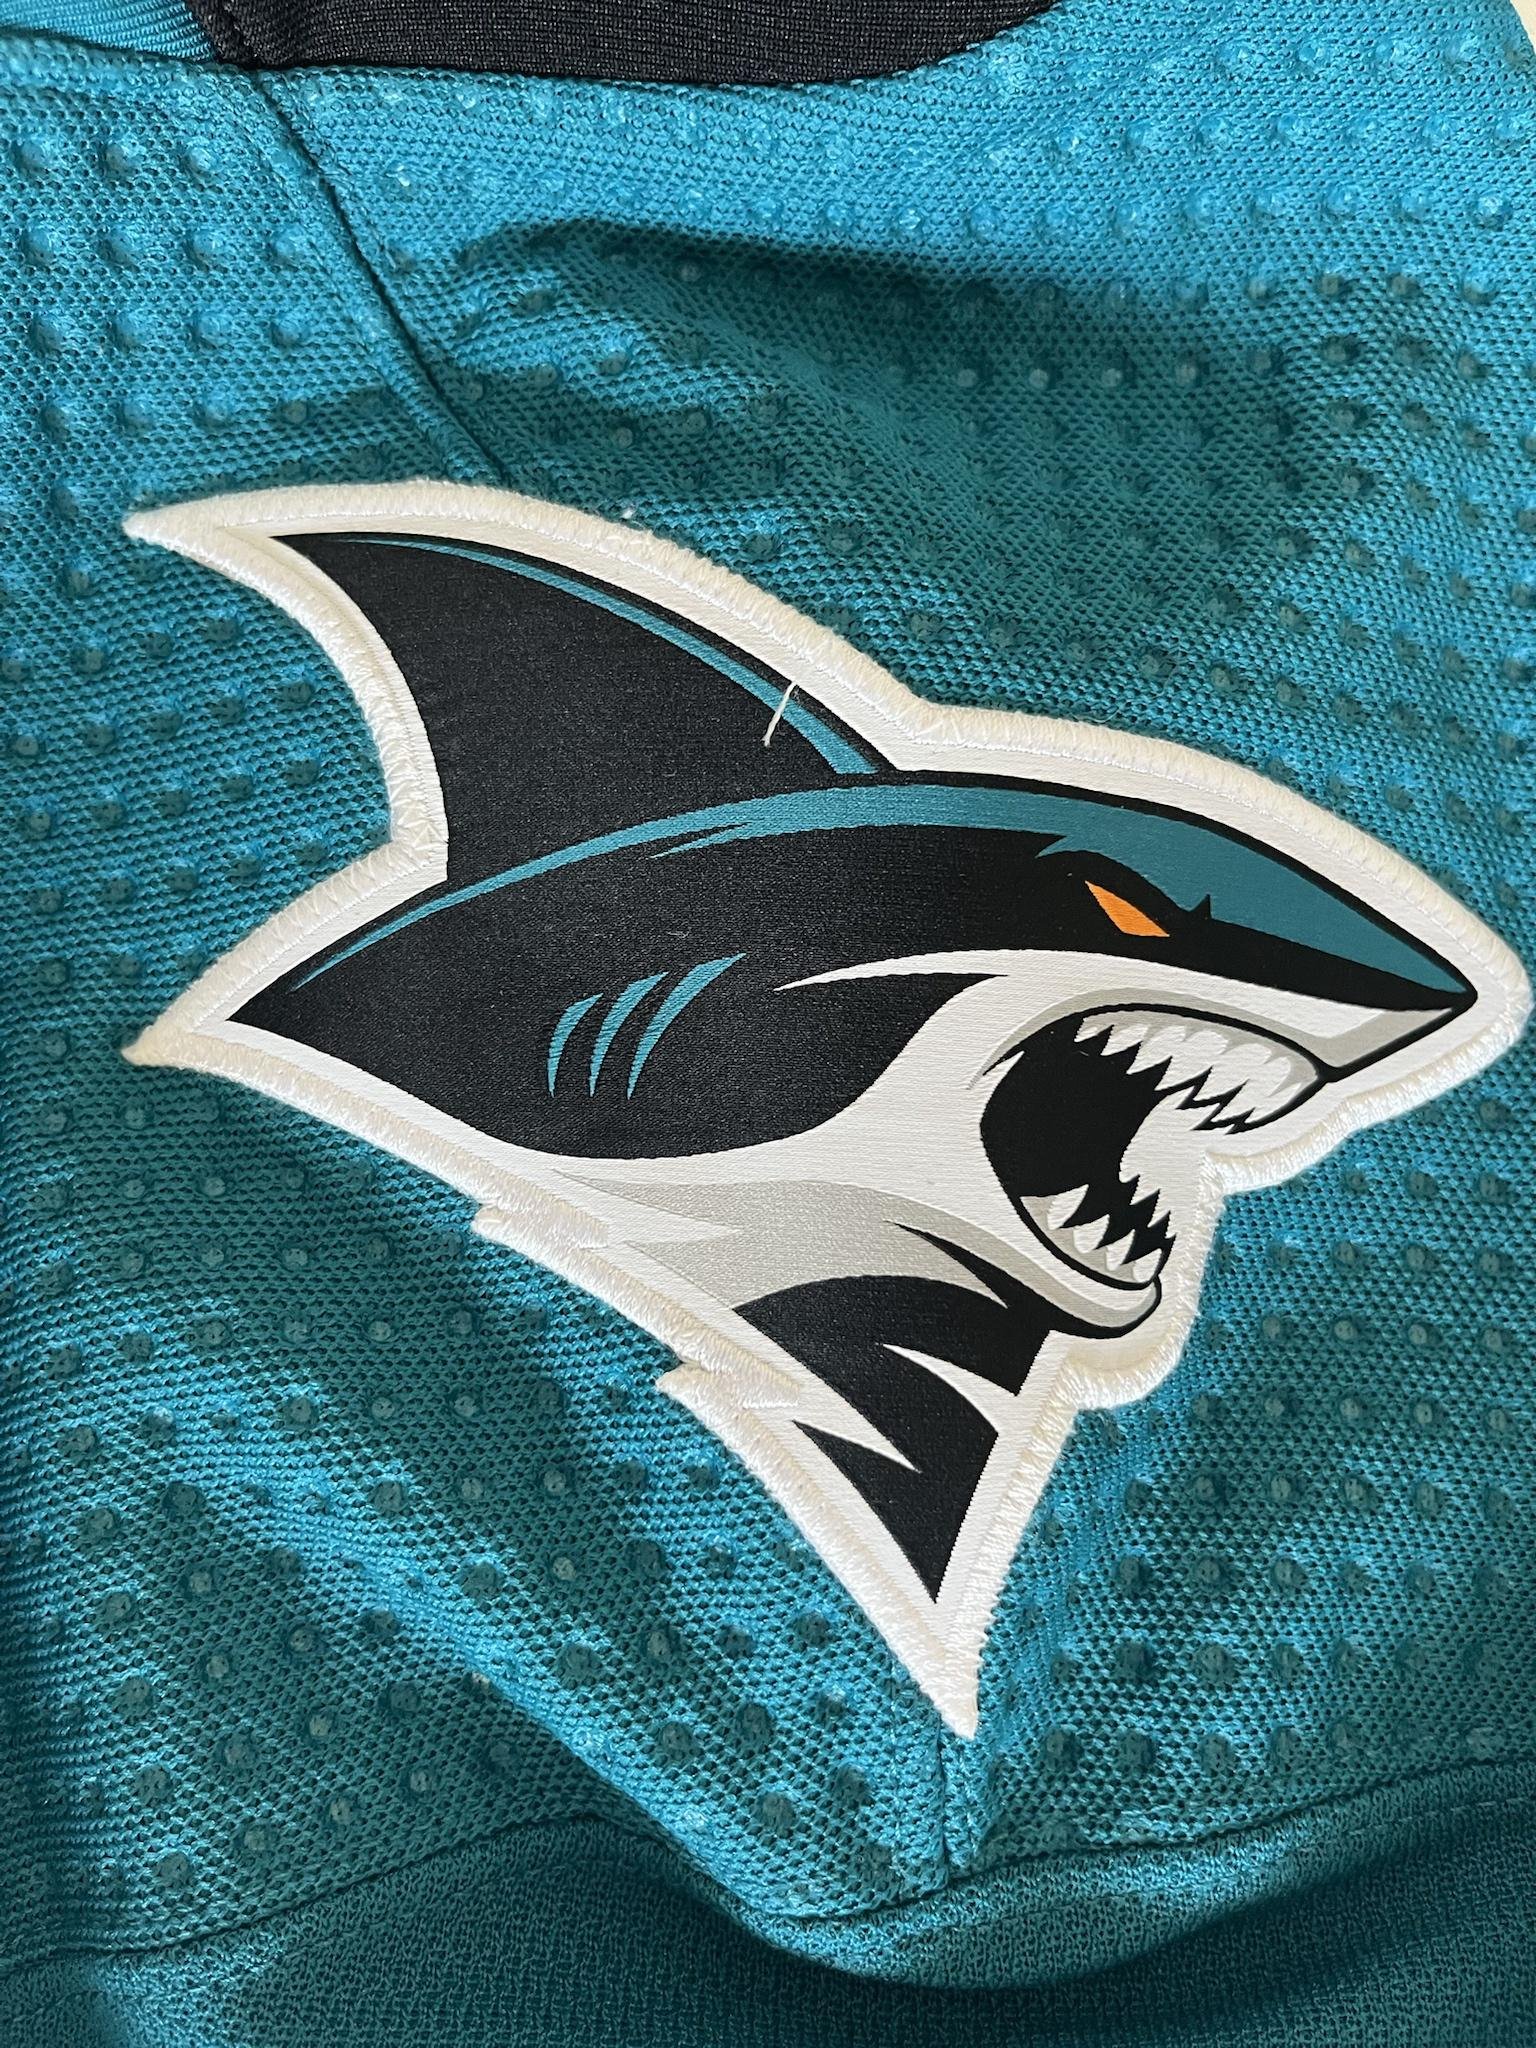 Sharks to wear jersey patch honouring successful playoff campaign